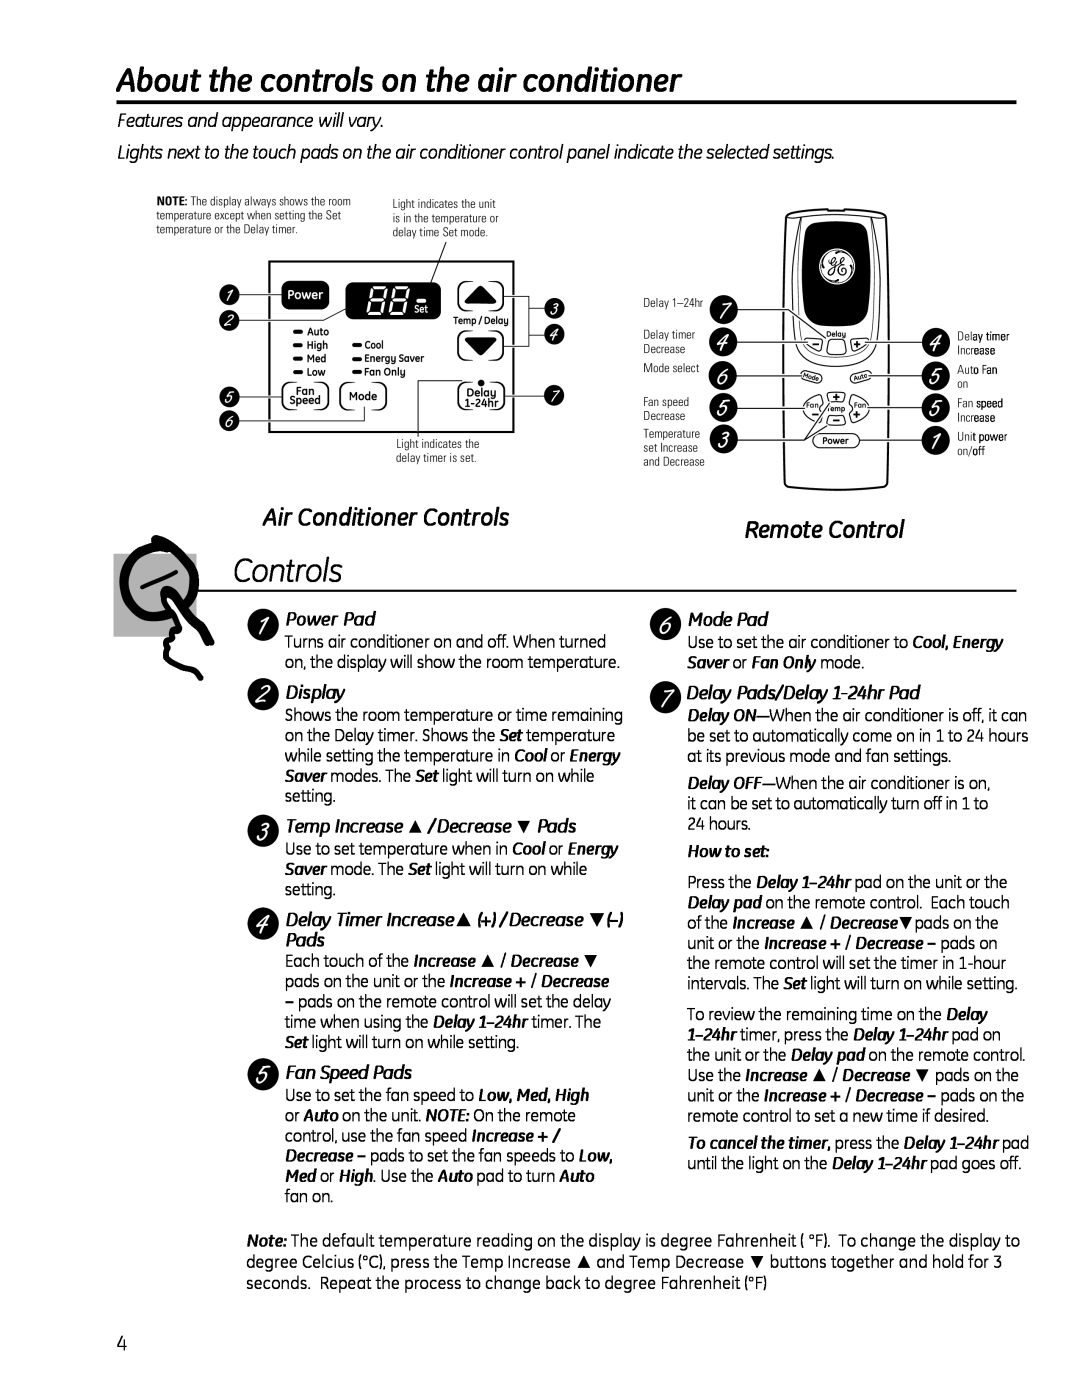 GE AEQ2, AEM2 About the controls on the air conditioner, Air Conditioner Controls, Remote Control, Power Pad, Mode Pad 